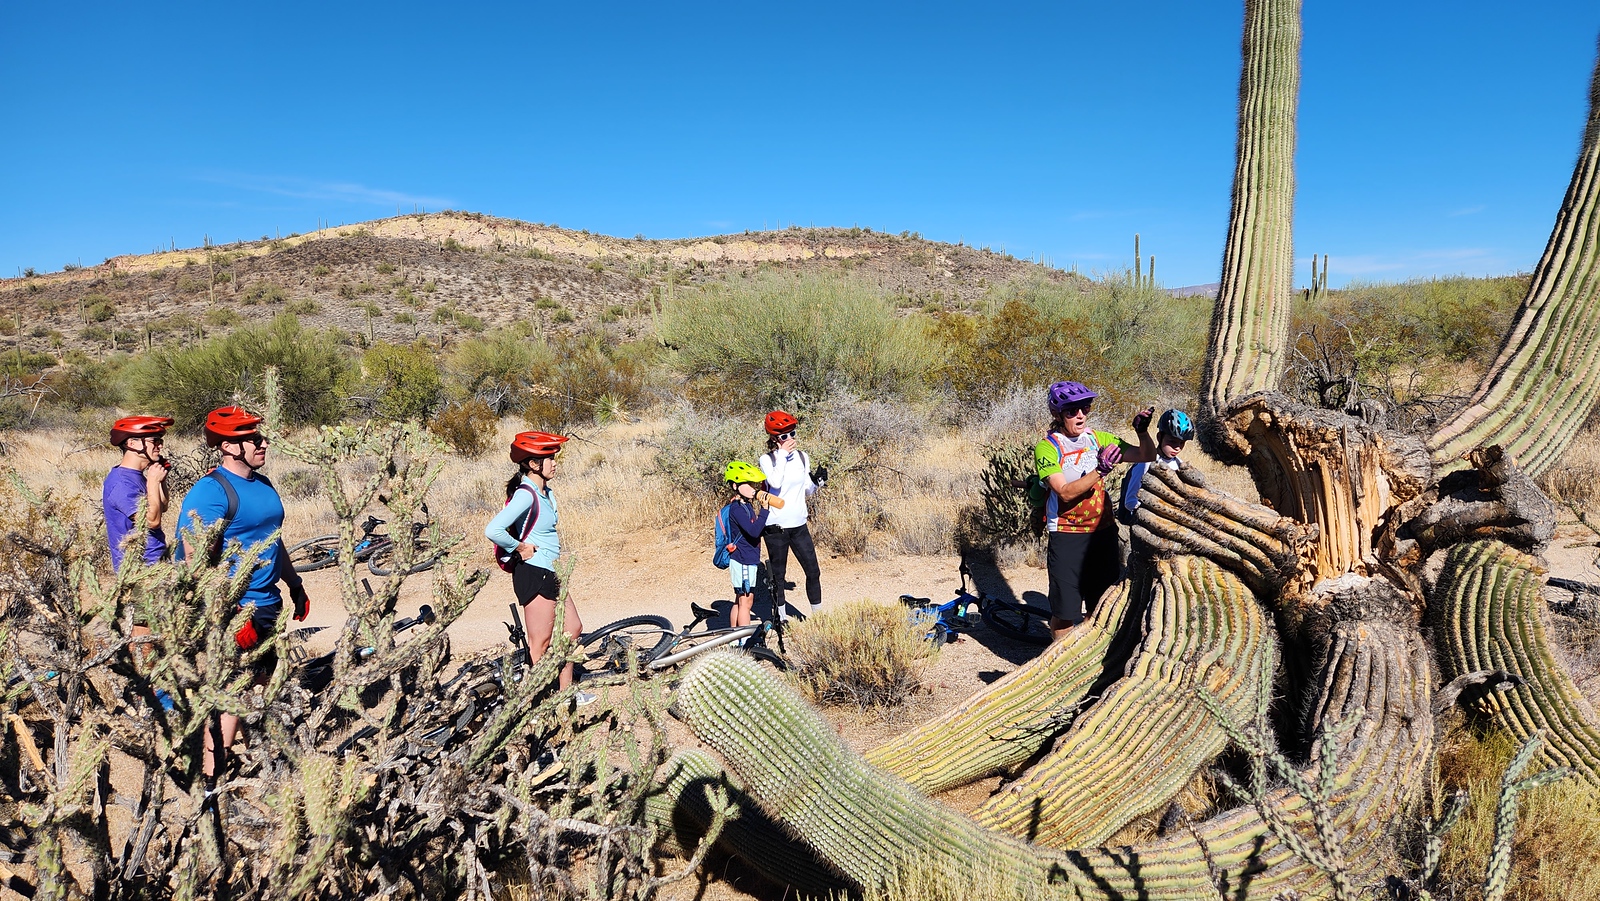 A Wild Bunch guide (far right) explains what happened to make the cactus pictured to collapse and die.